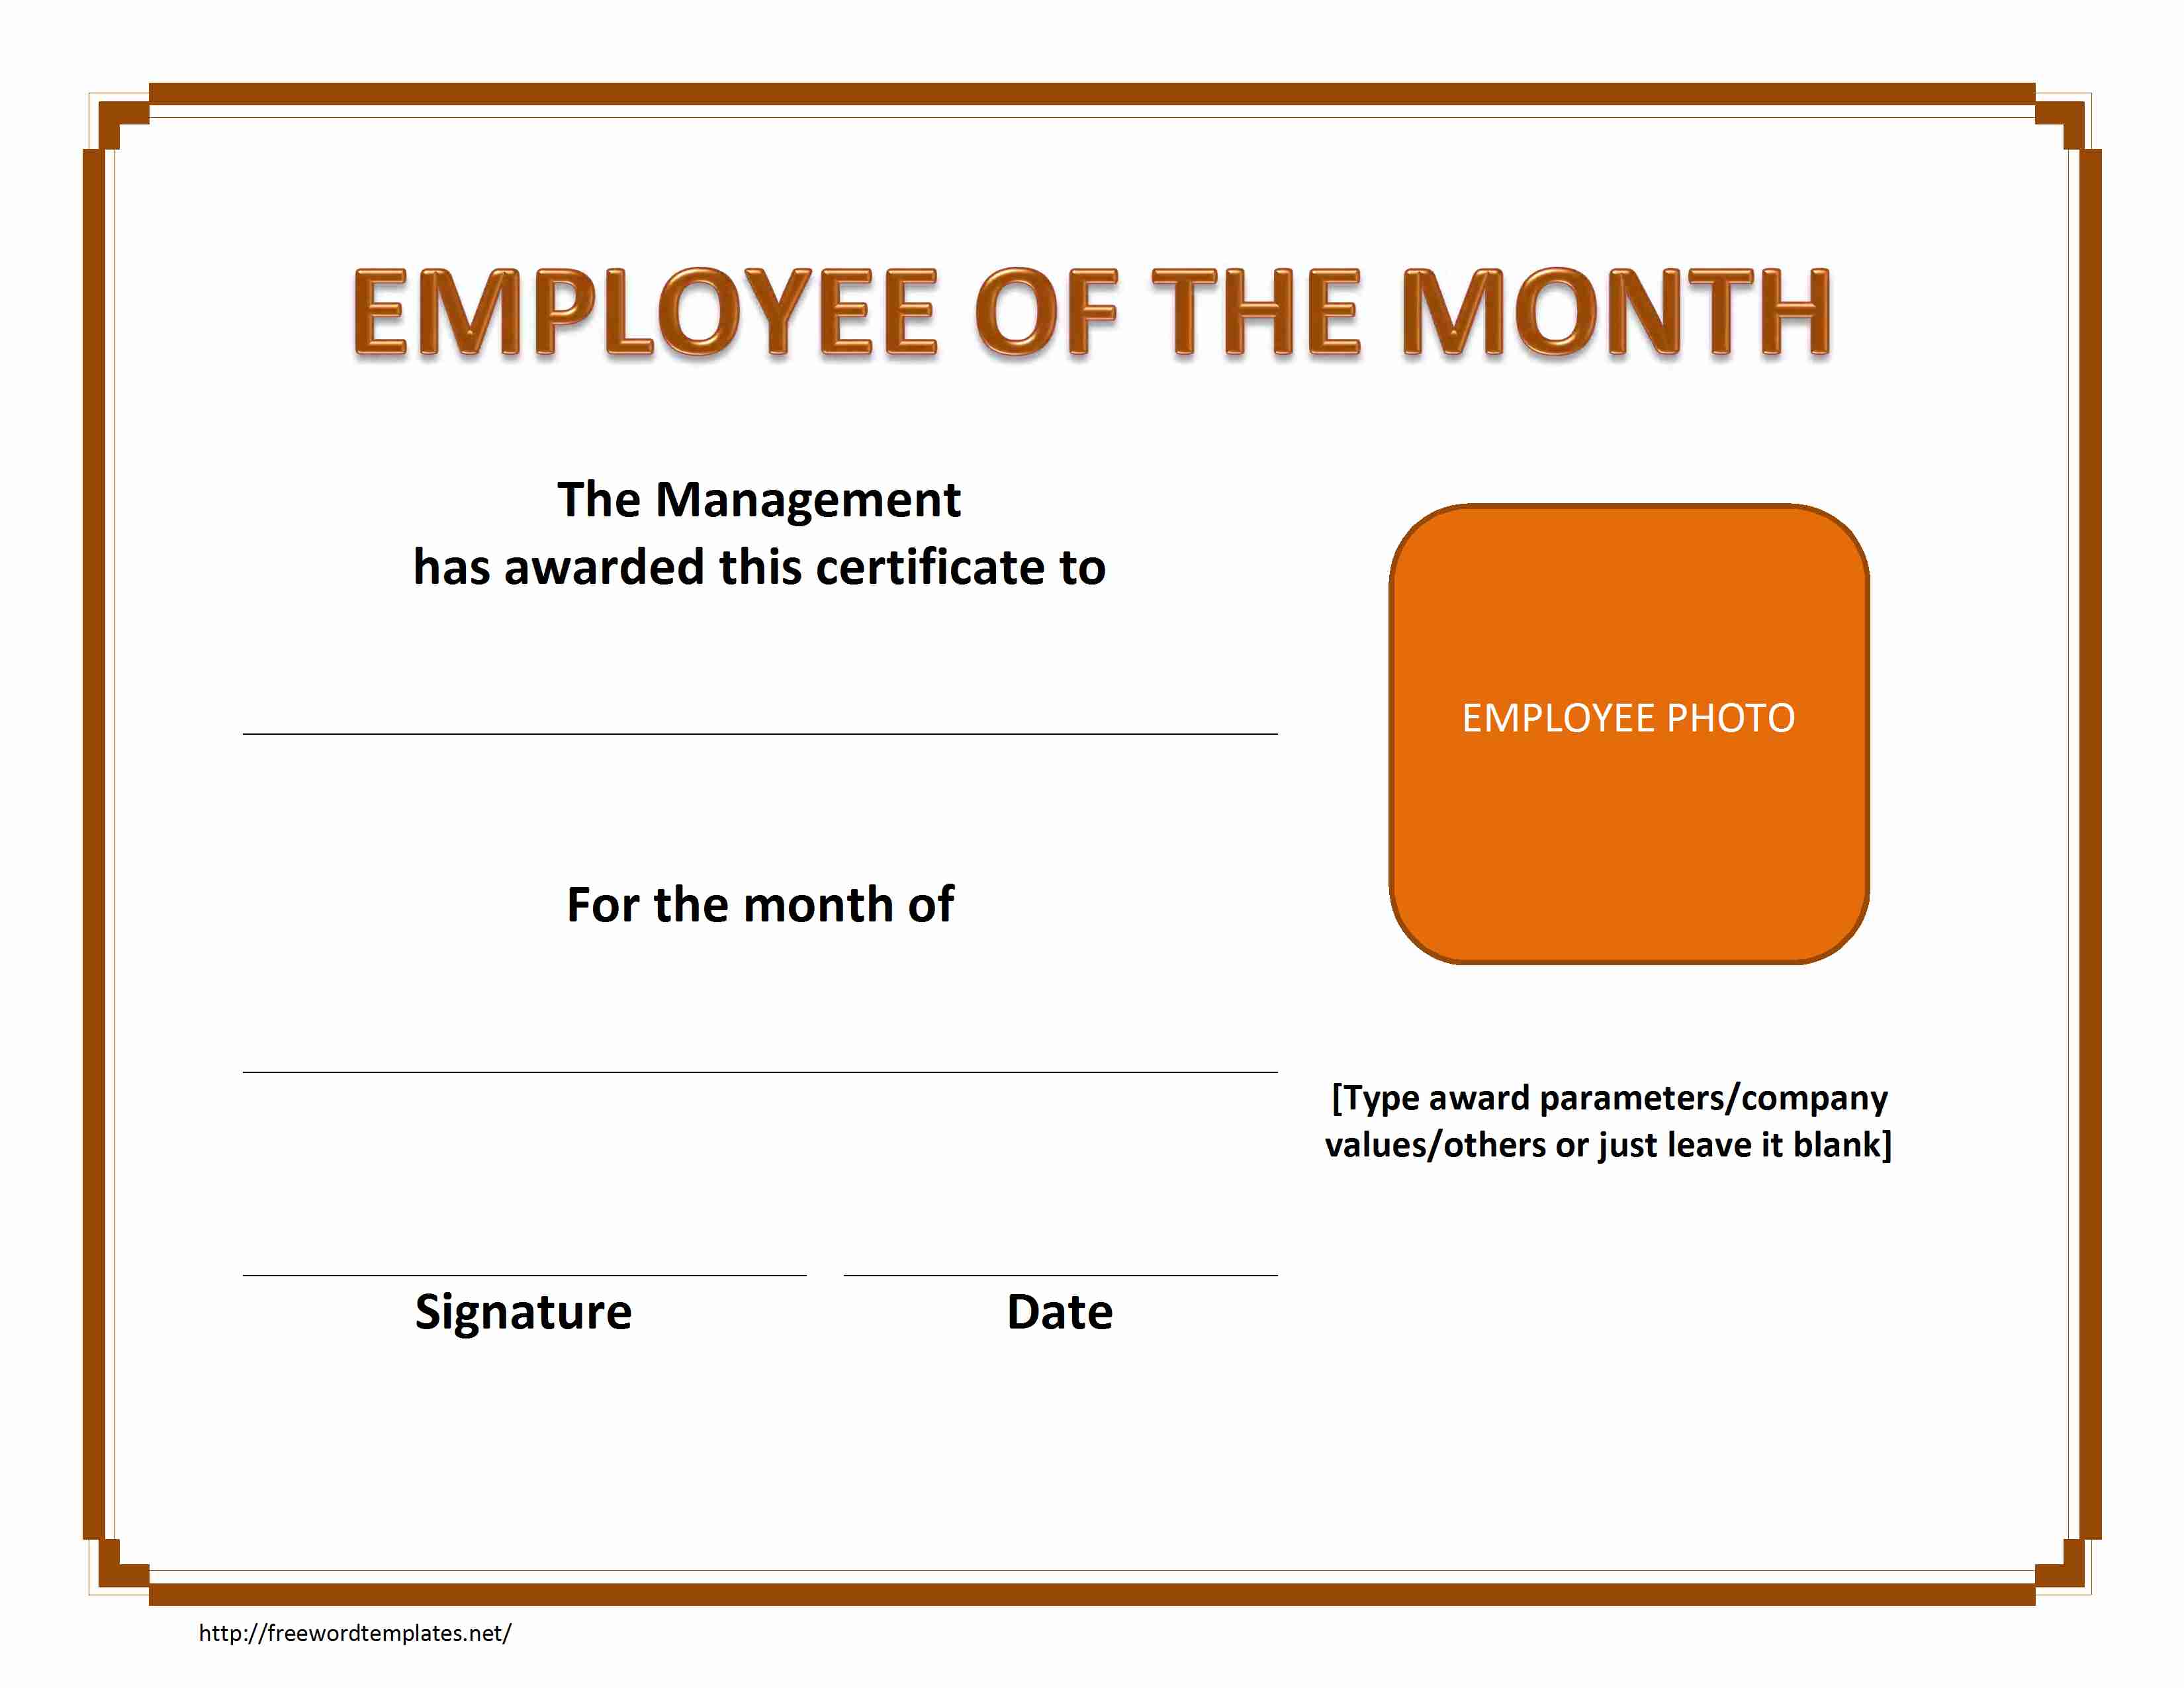 Employe of The Month Certificate Template for Word